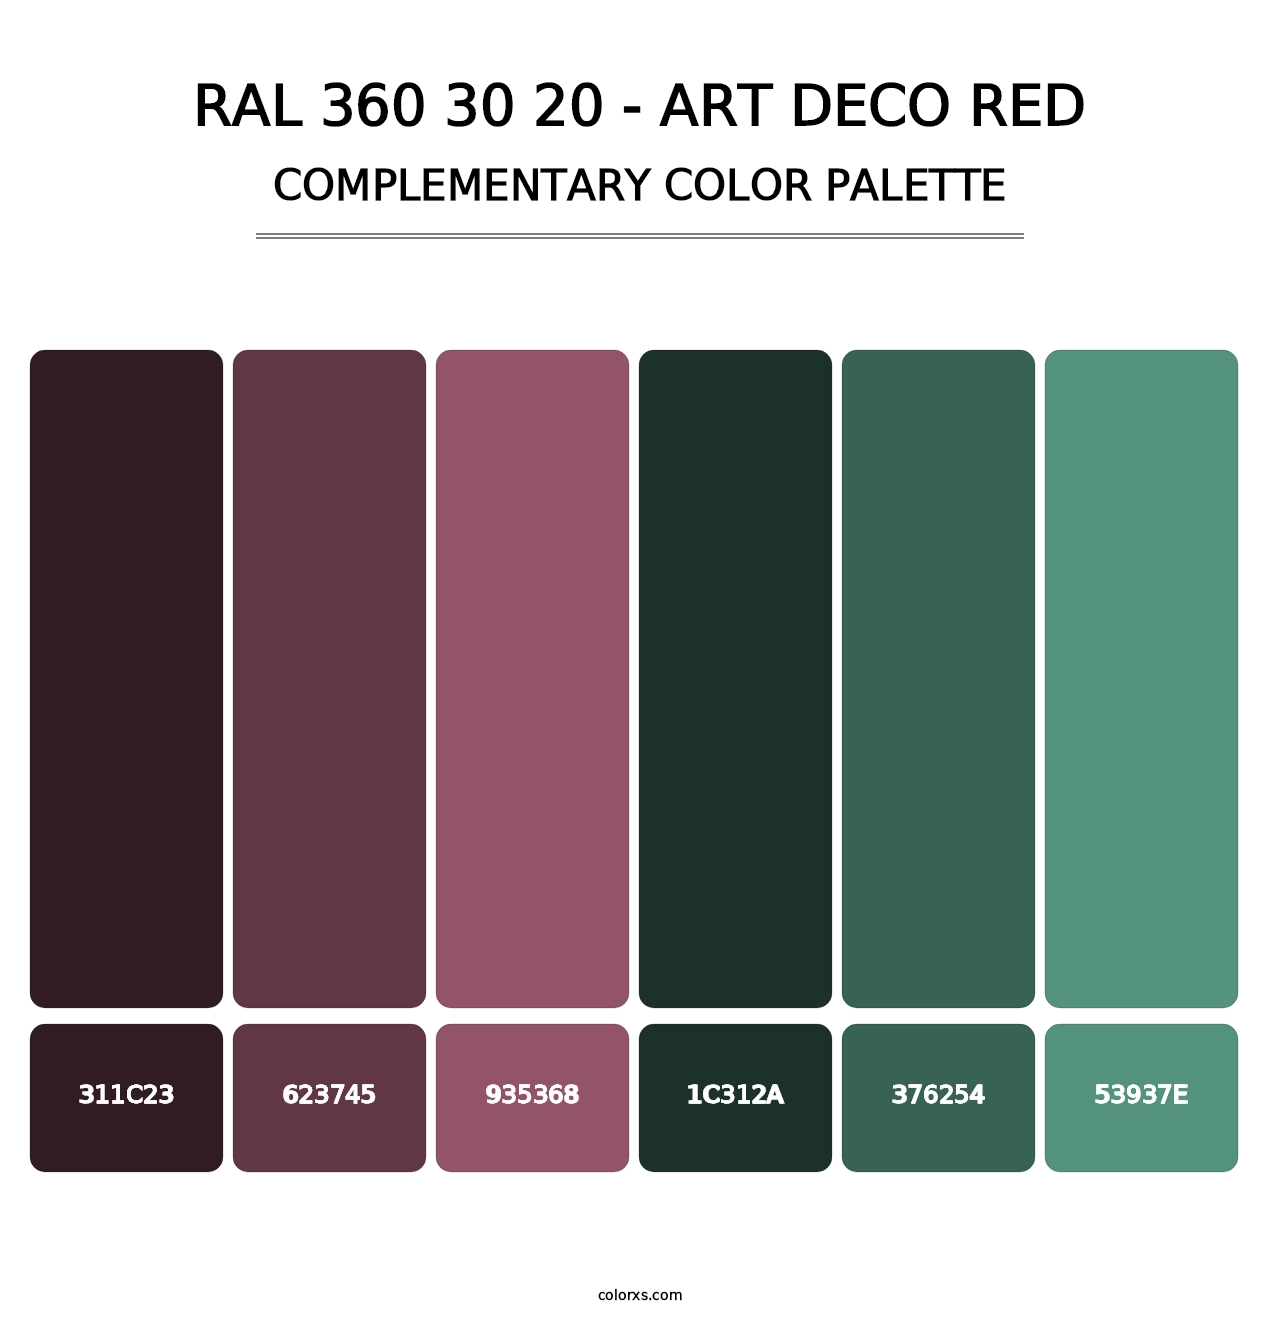 RAL 360 30 20 - Art Deco Red - Complementary Color Palette